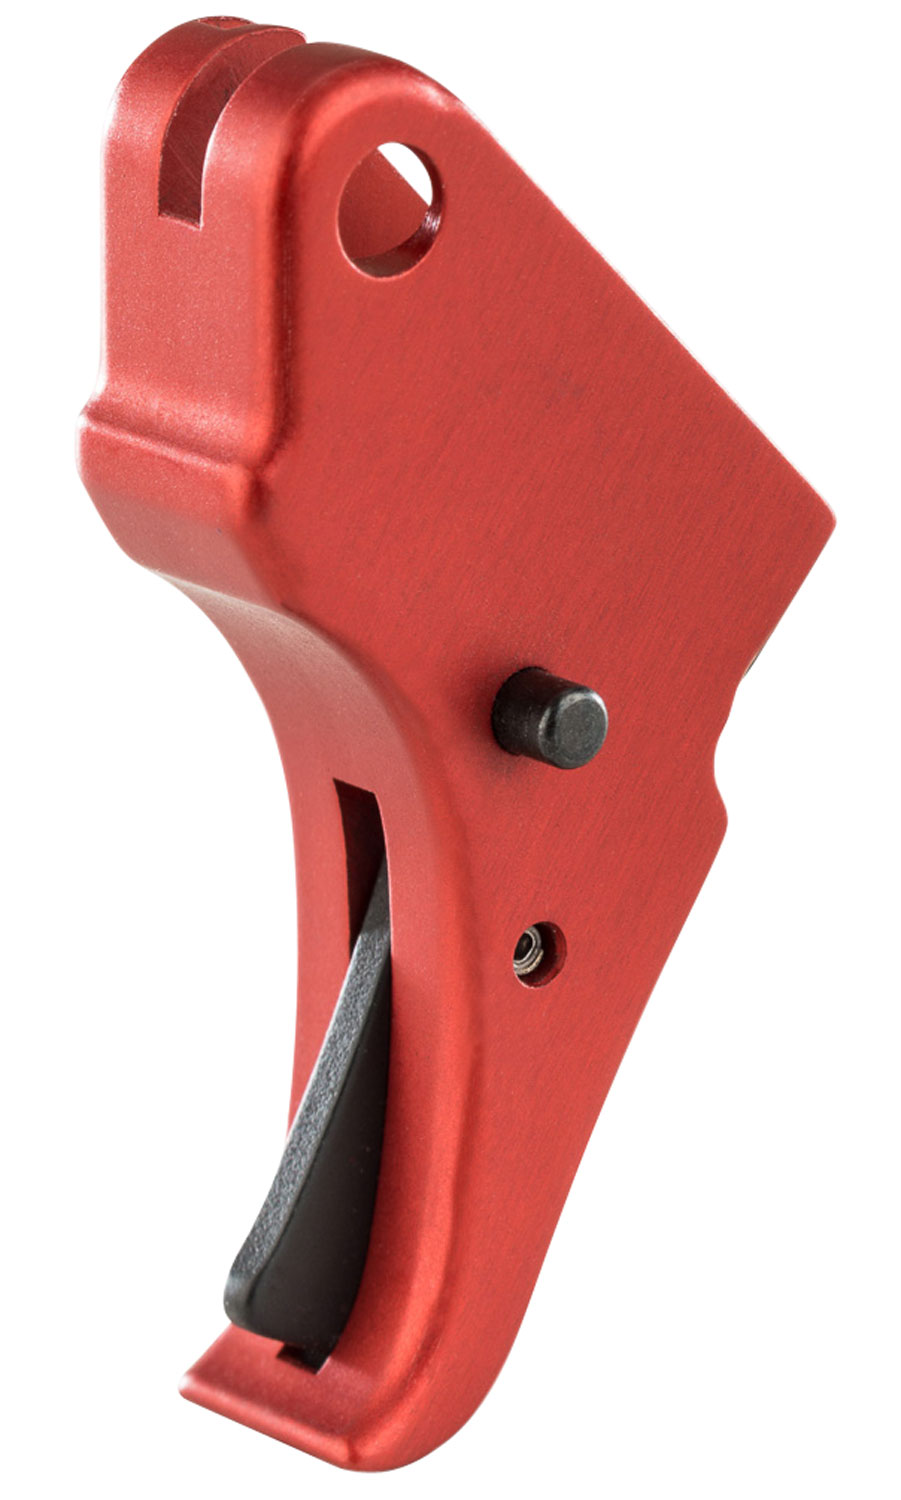 Apex Tactical 100056 Action Enhancement Duty/Carry Kit Drop-in Trigger with 1-2 lbs Draw Weight & Red Finish for S&W M&P Shield